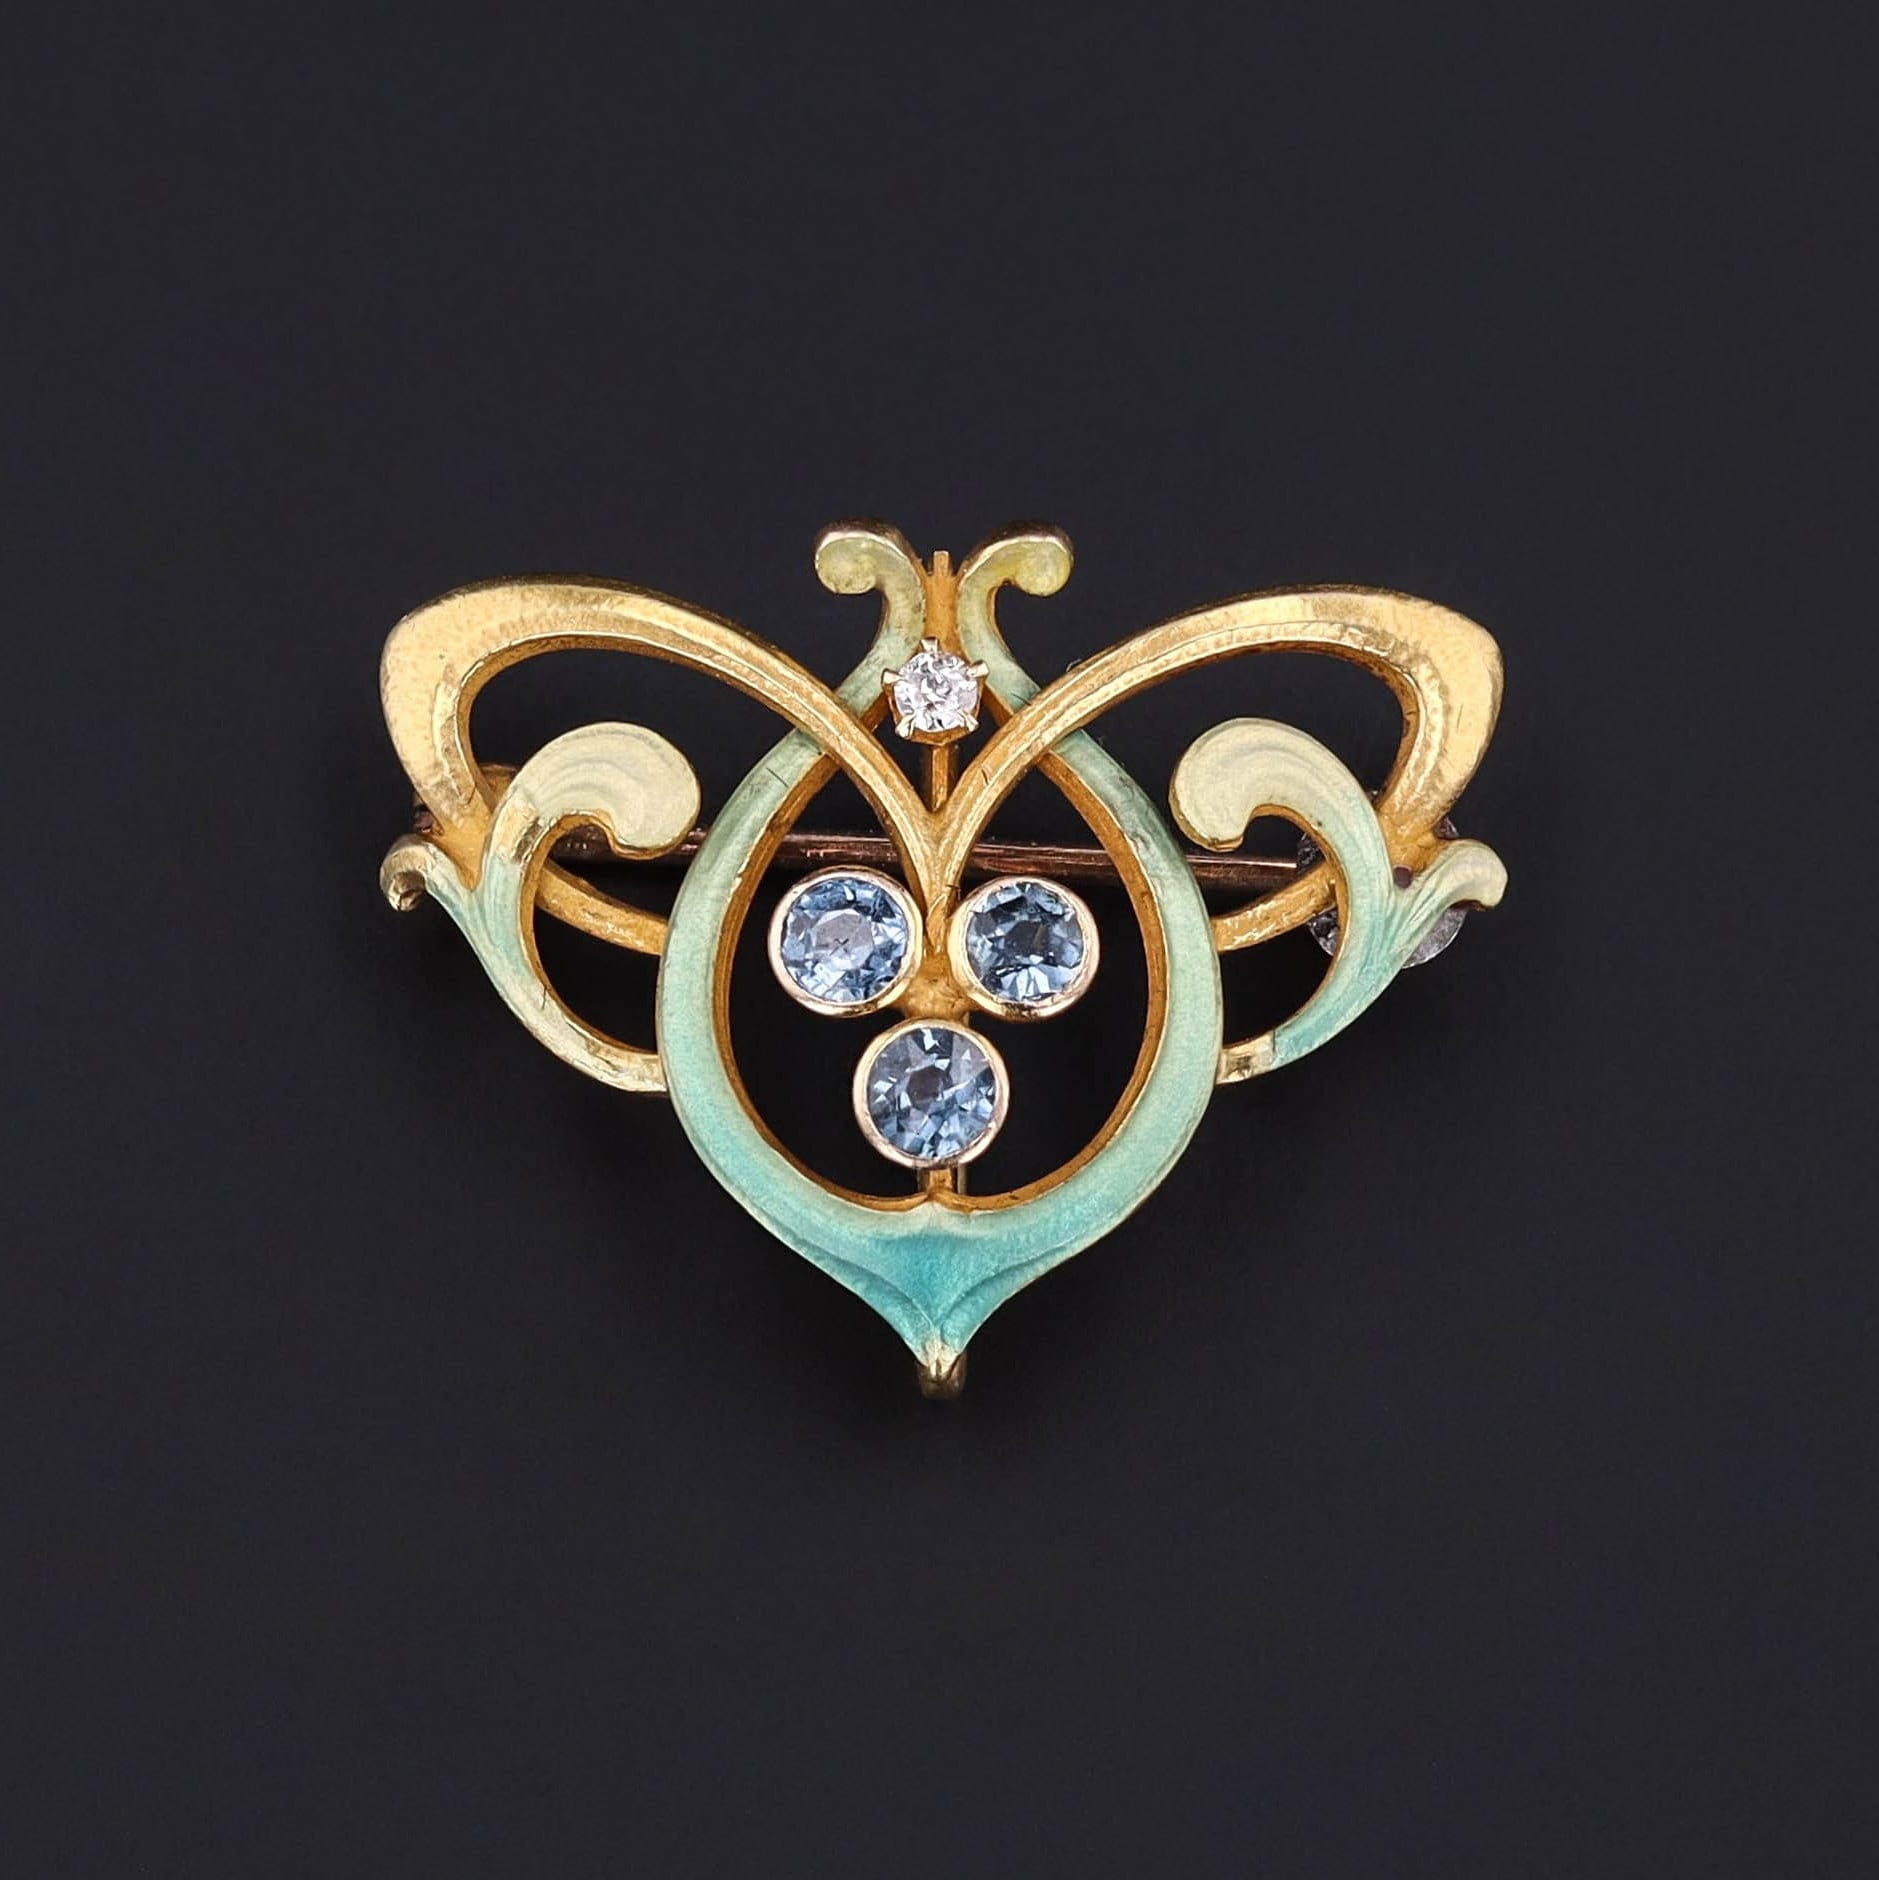 Antique Enamel and Sapphire Brooch of 14k Gold